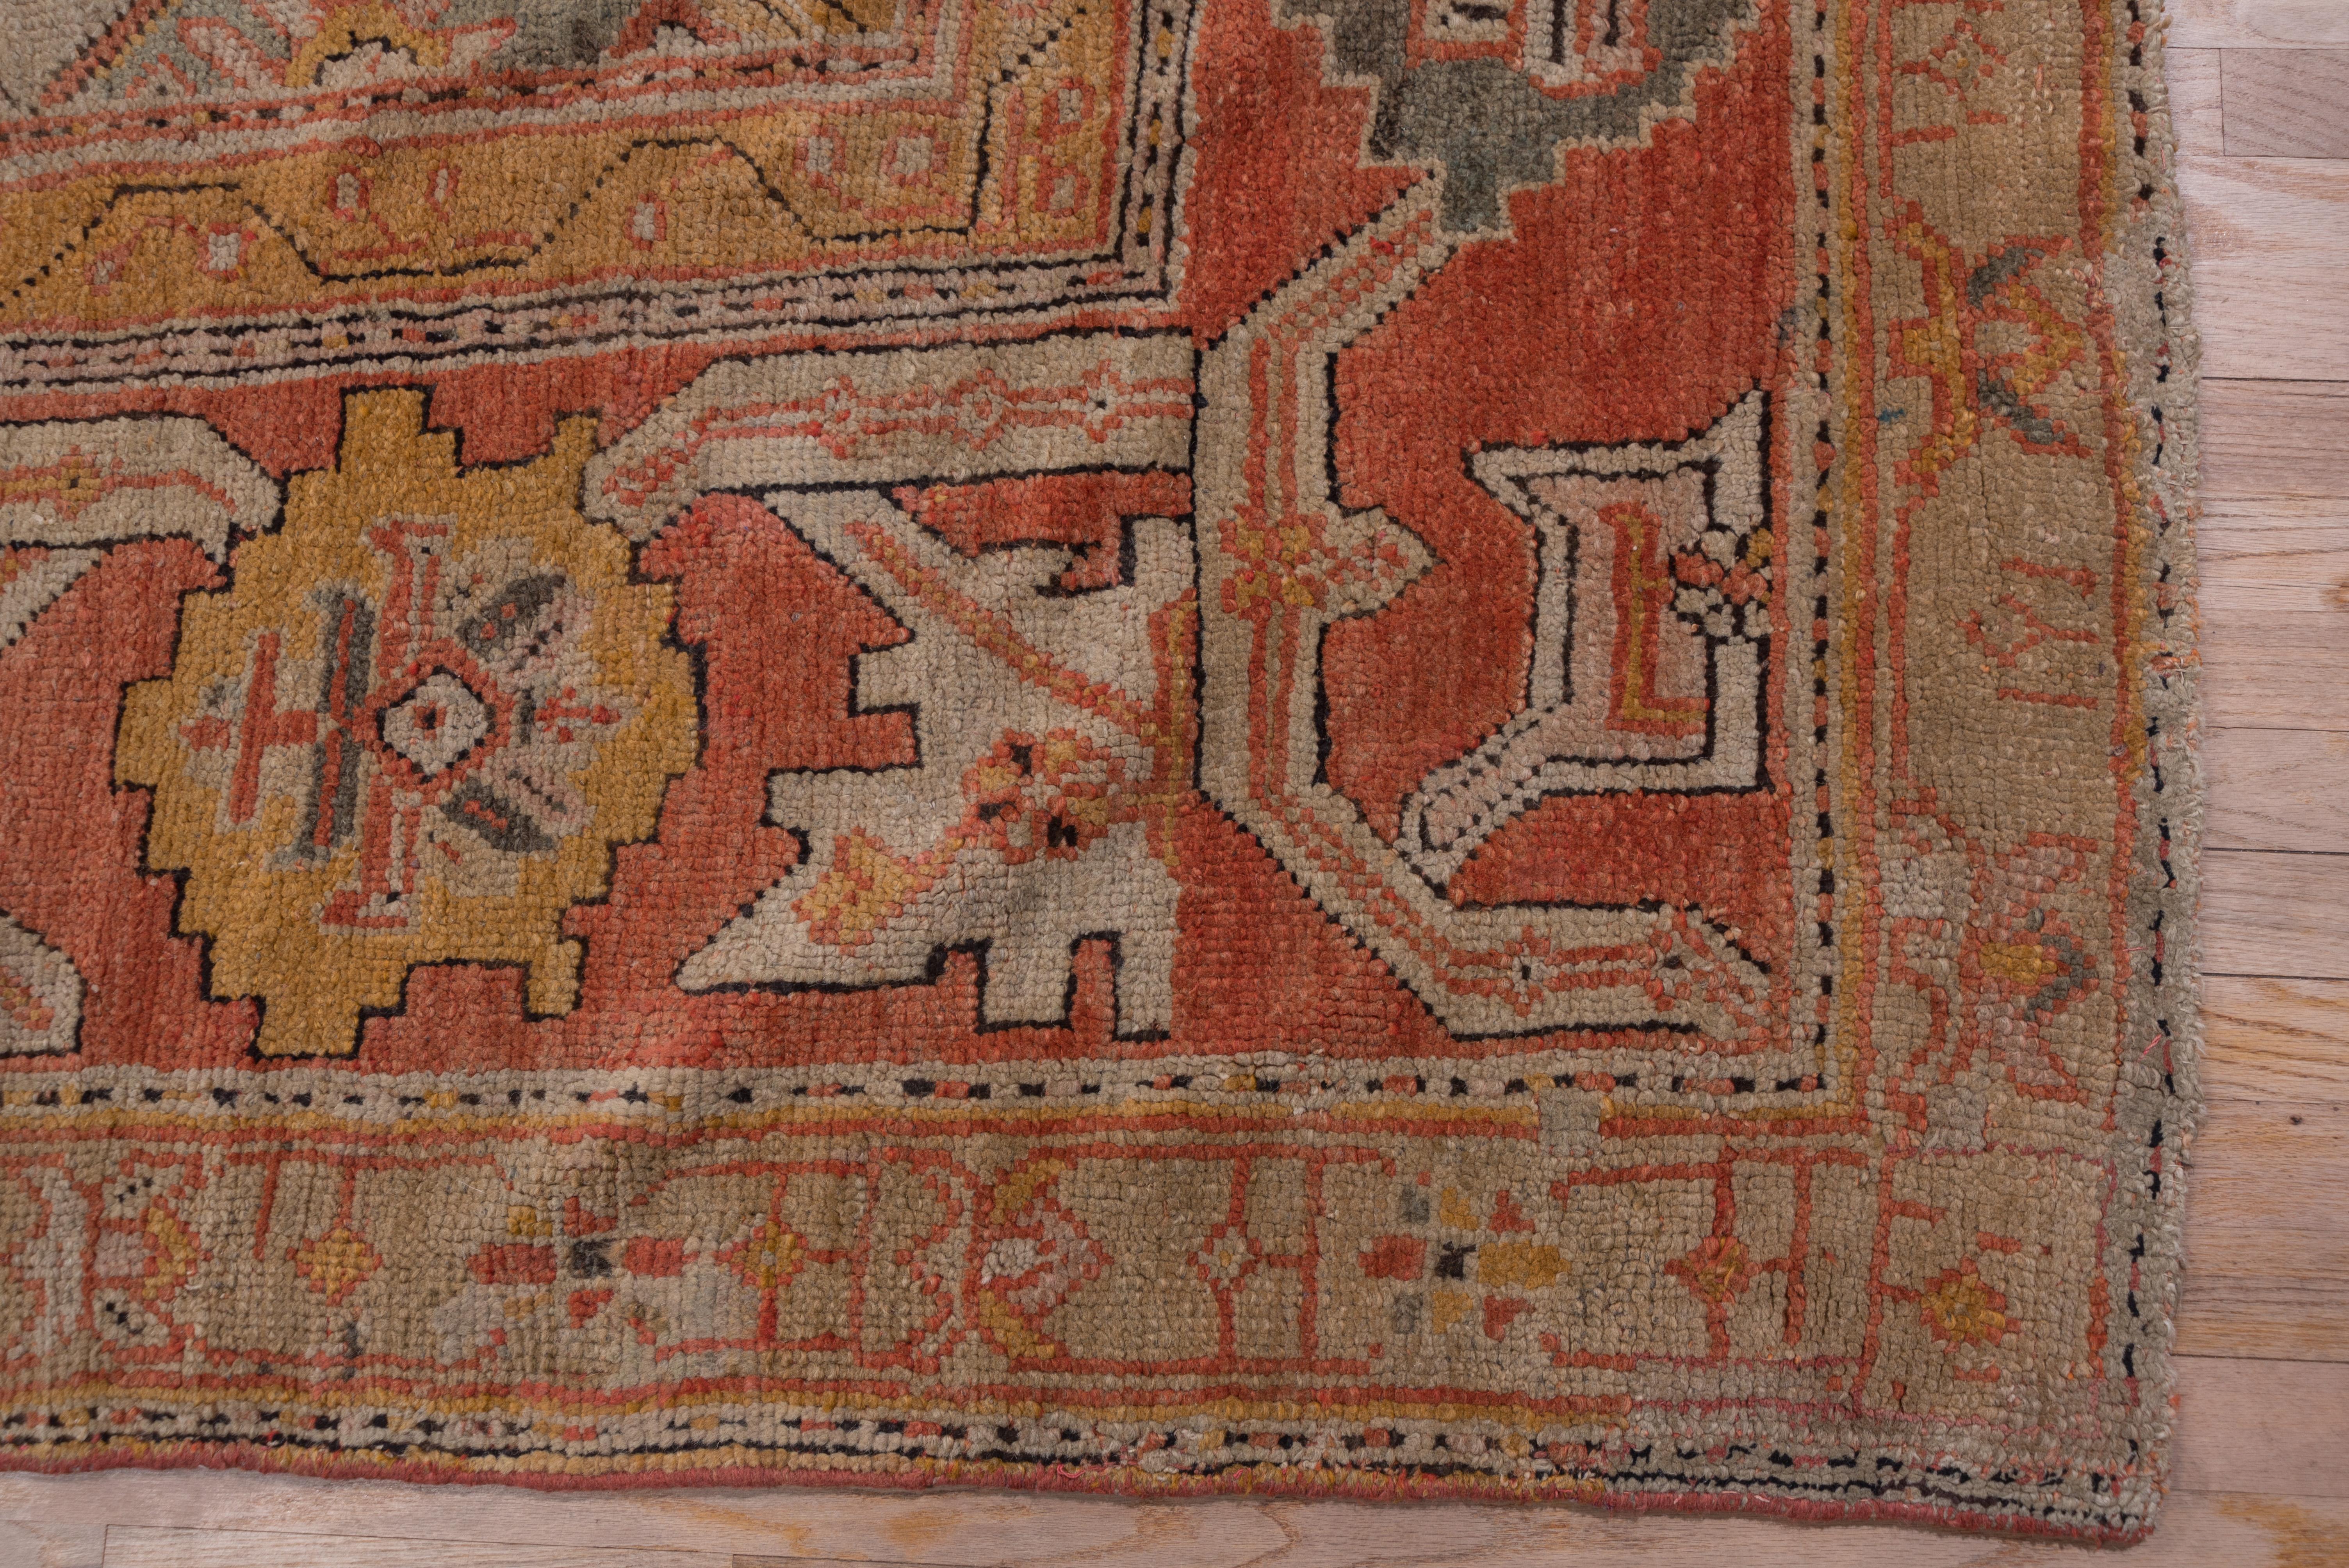 Incredible Antique Oushak Turkish Carpet, Amazing Colors, Allover Field, 1900s For Sale 4